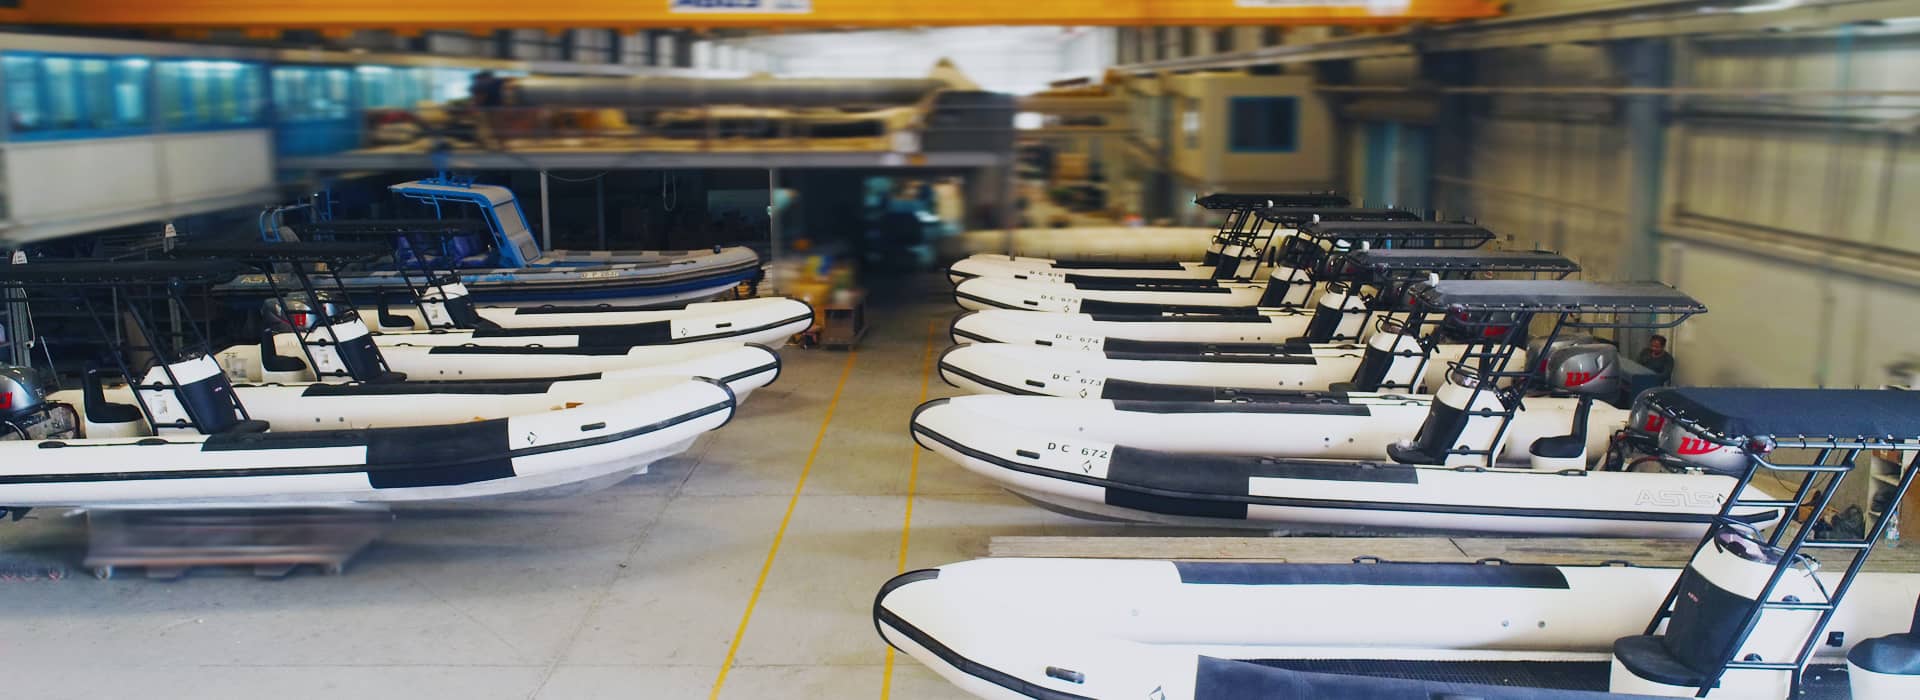 The ASIS Boats Factory